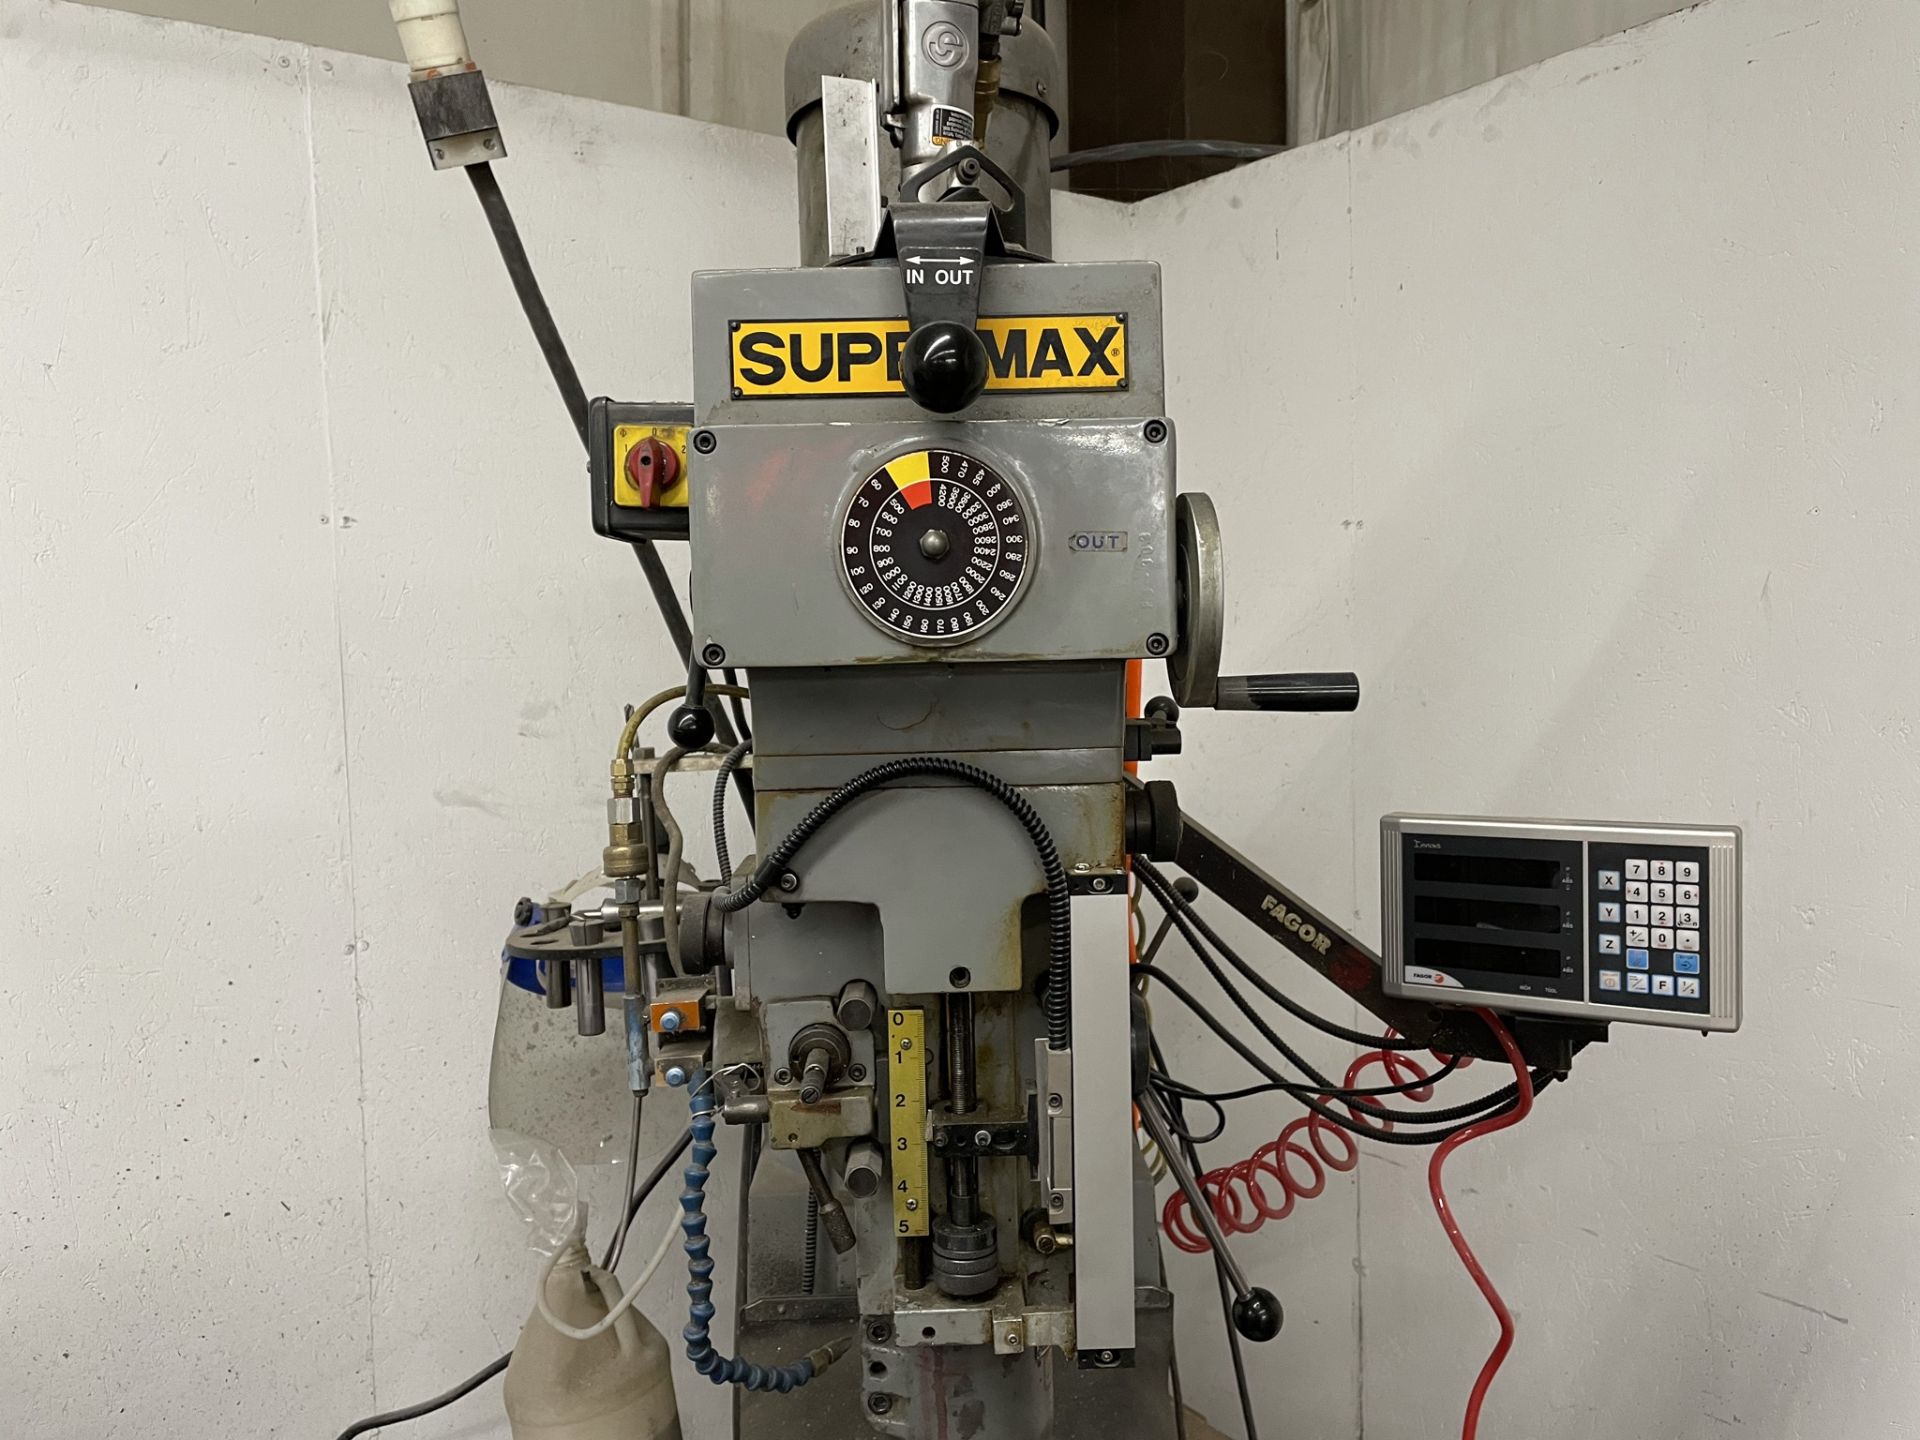 Supermax Vertical Mill - Mfg. 1999 / Model YCM-16VS / SN# 0123574 / 9” x 49” Table / Power Feed / - Image 2 of 13